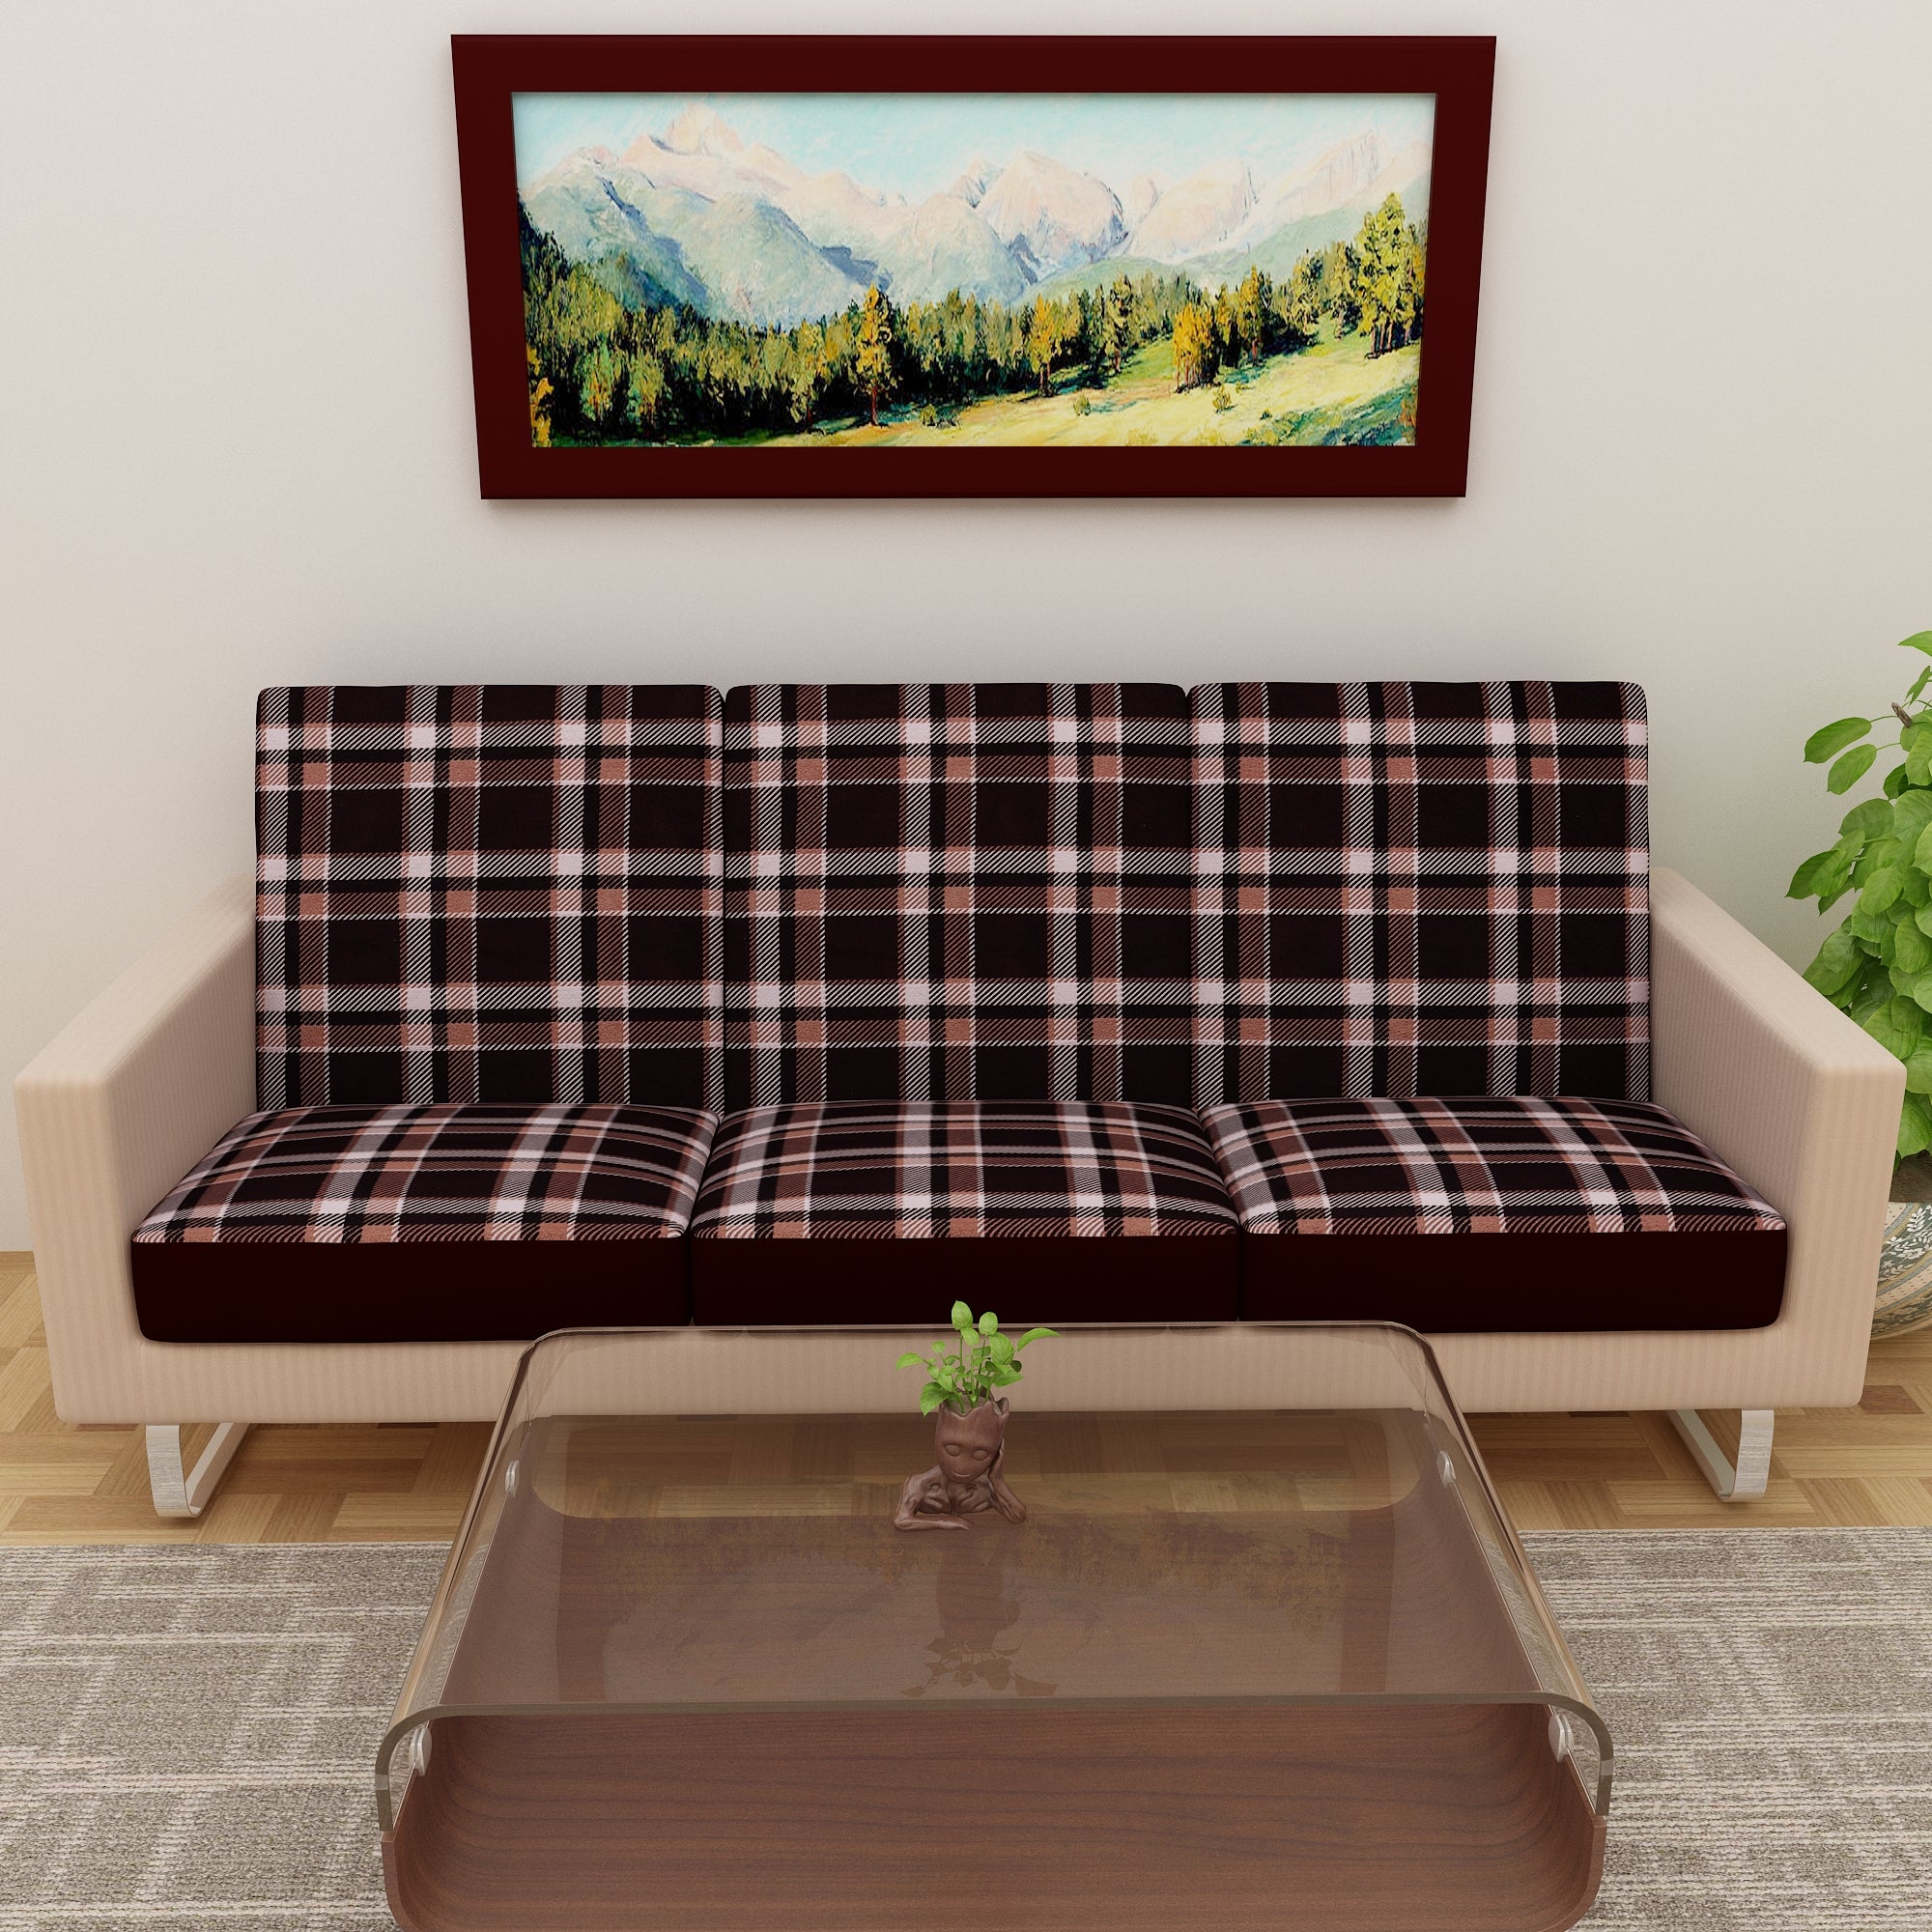 Waterproof Printed Sofa Seat Protector Cover with Stretchable Elastic, Brown - Dream Care Furnishings Private Limited